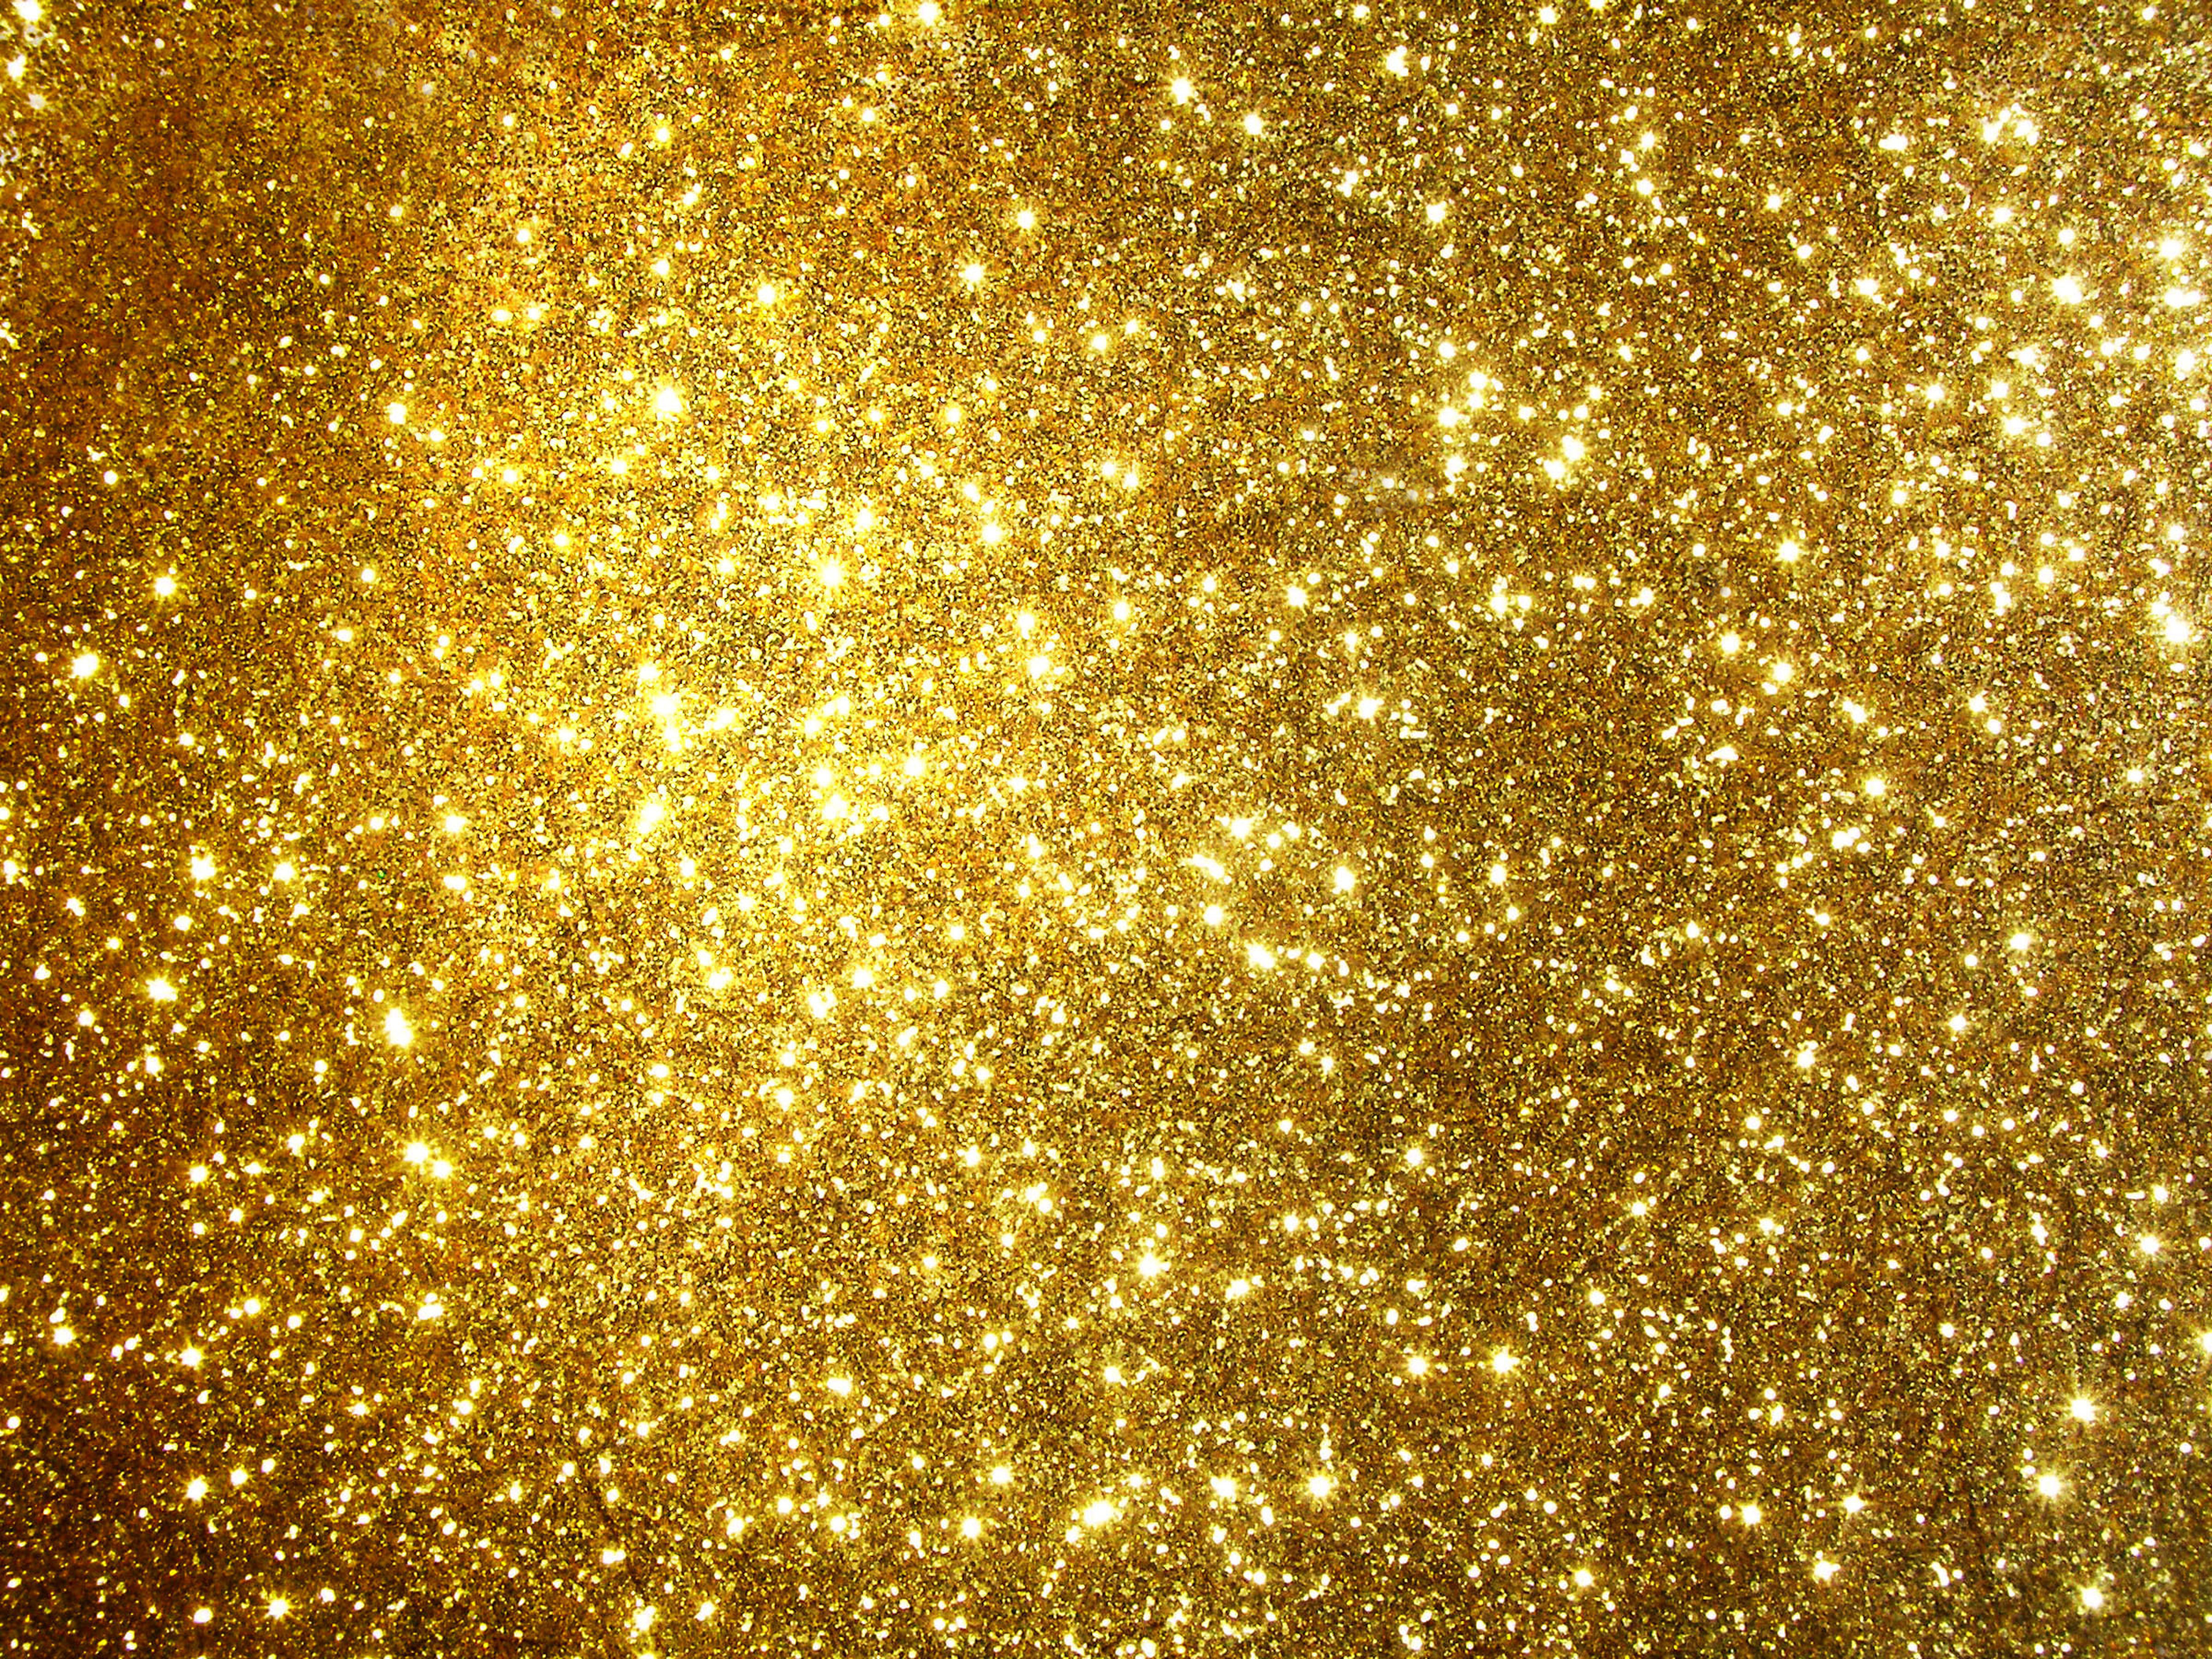 glitter gold background gallery yopriceville high quality images and transparent png free clipart gallery yopriceville